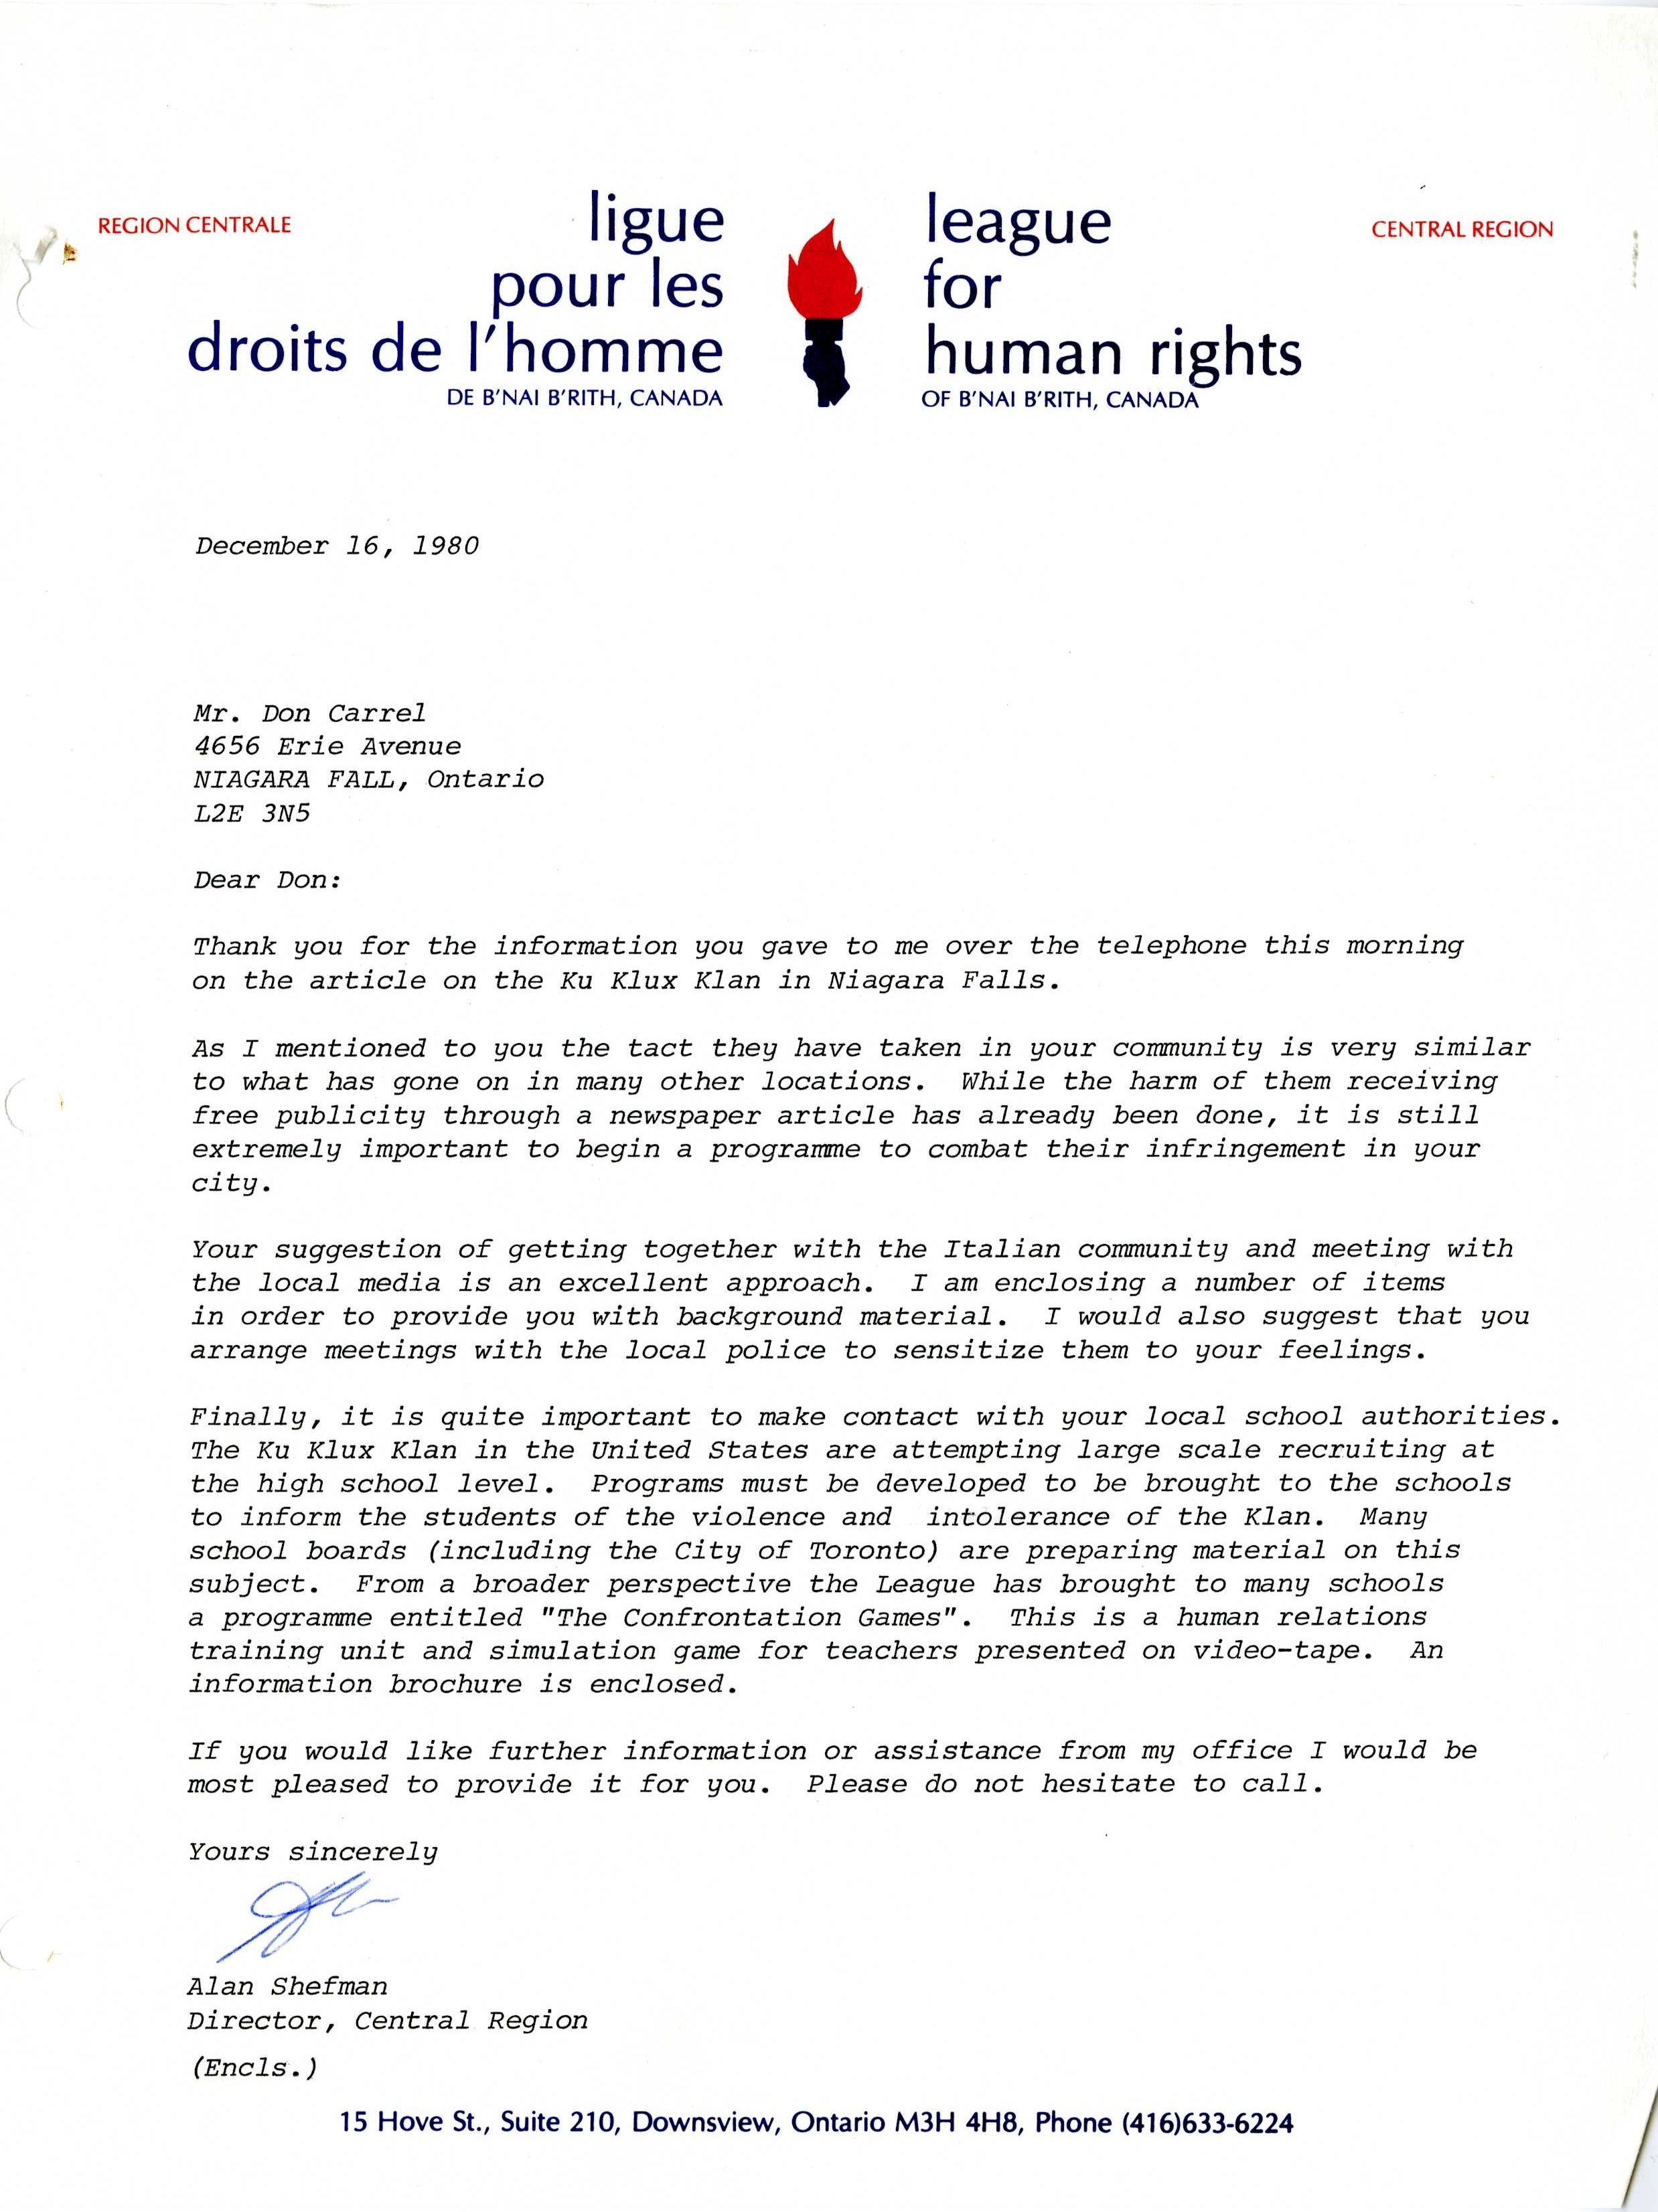 Letter from the B’nai Brith’s League for Human Rights to Don Carrel, 16 December 1980